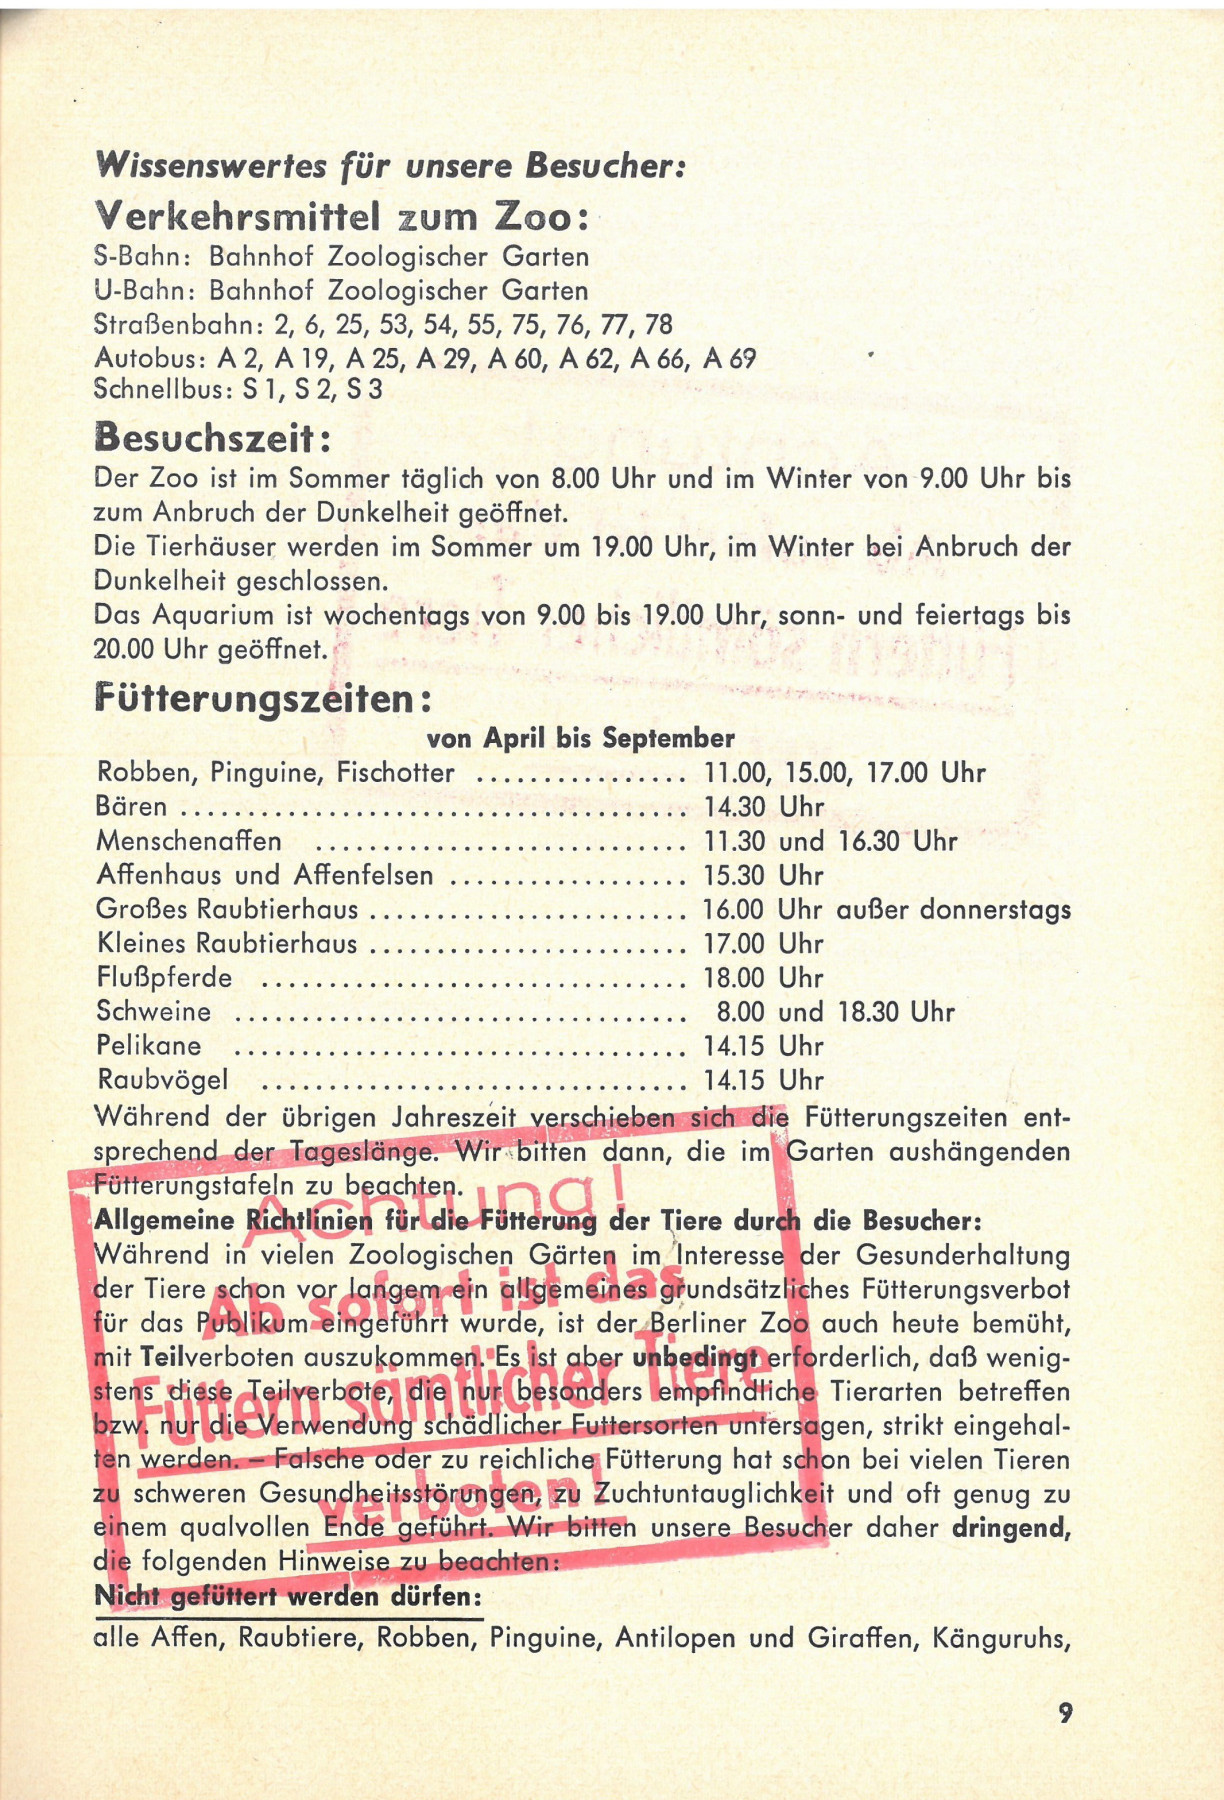 Page 9 of an outdated zoo guide. Headings: Getting to the Zoo; Visiting Hours; Feeding Times. Large red stamp in the lower third of the brochure, right across the "Allgemeine Richtlinien für die Fütterung der Tiere durch die Besucher": Attention! From now on, feeding all animals is prohibited!